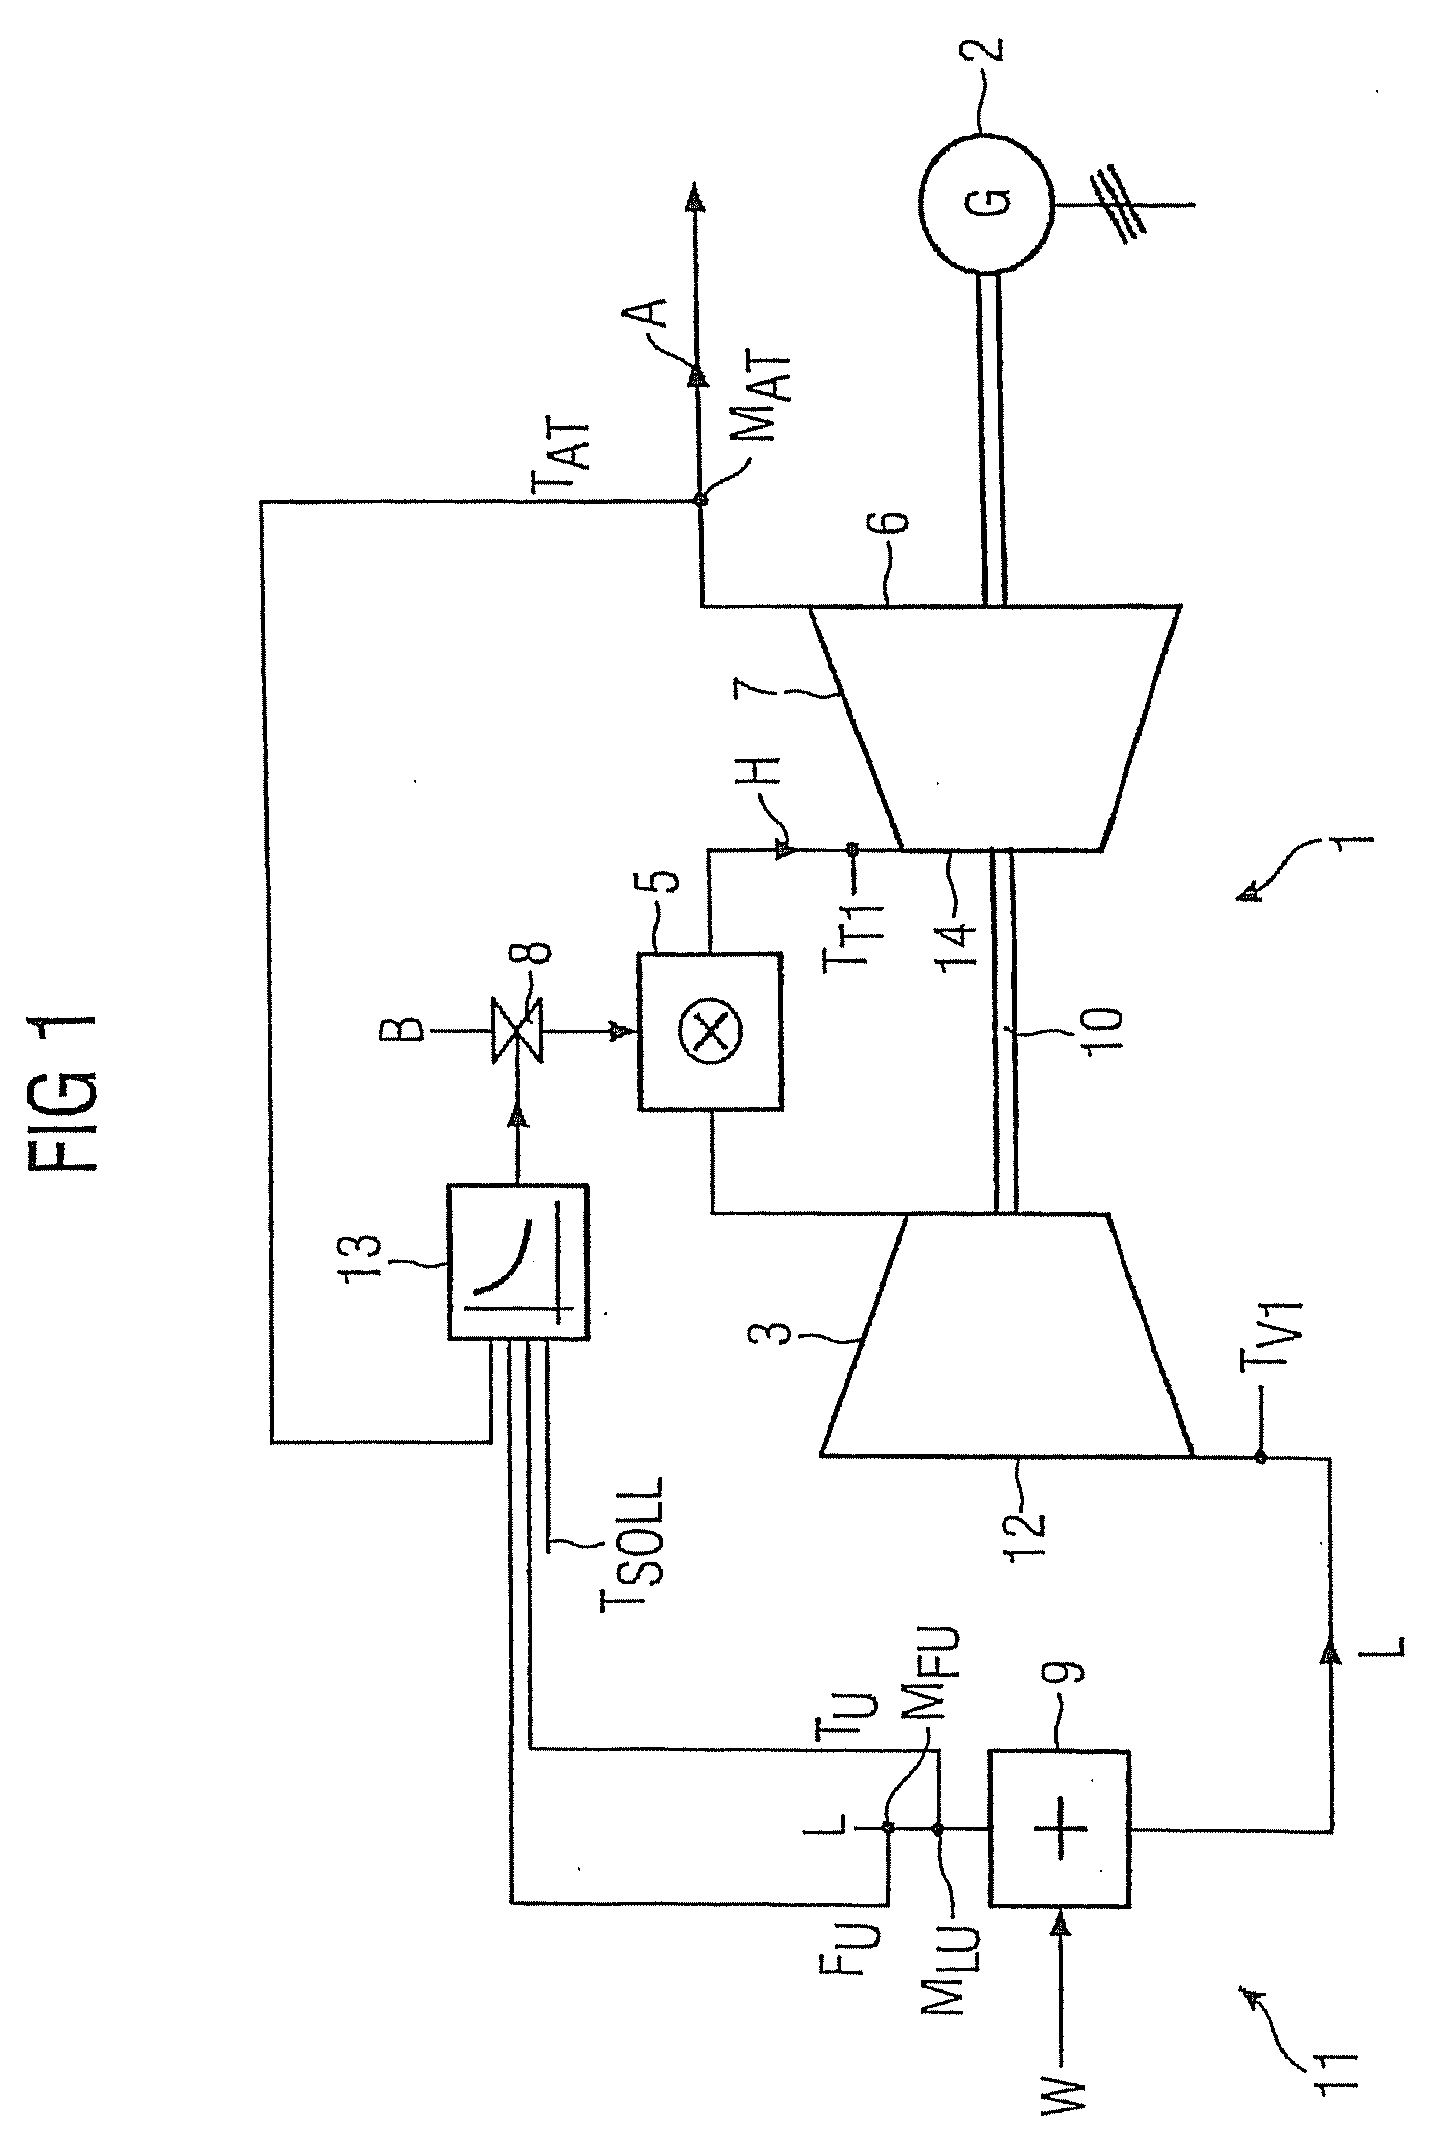 Method of Regulation of the Temperature of Hot Gas of a Gas Turbine